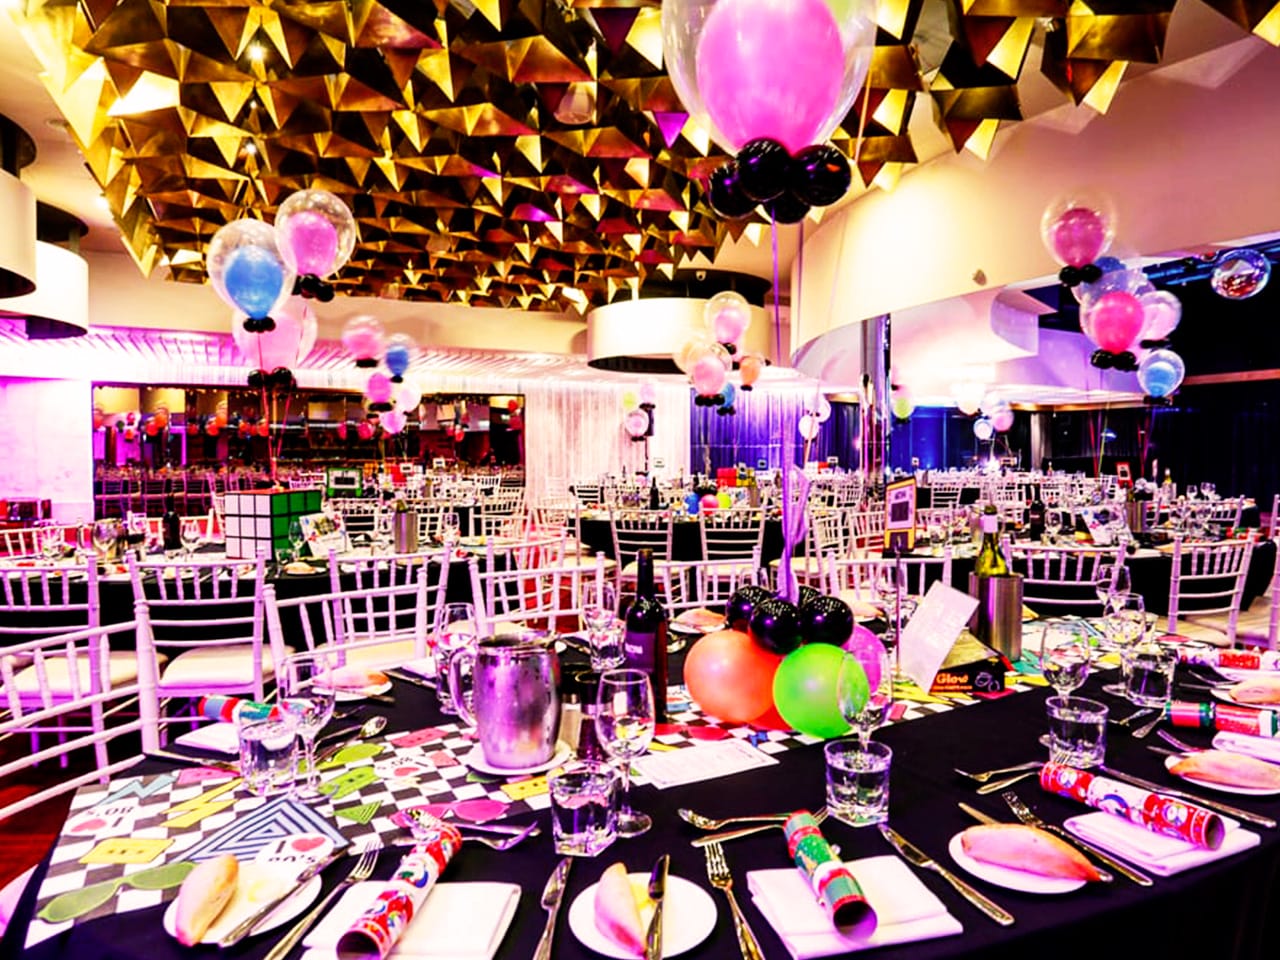 Black tables set for an event with balloons decorating each table